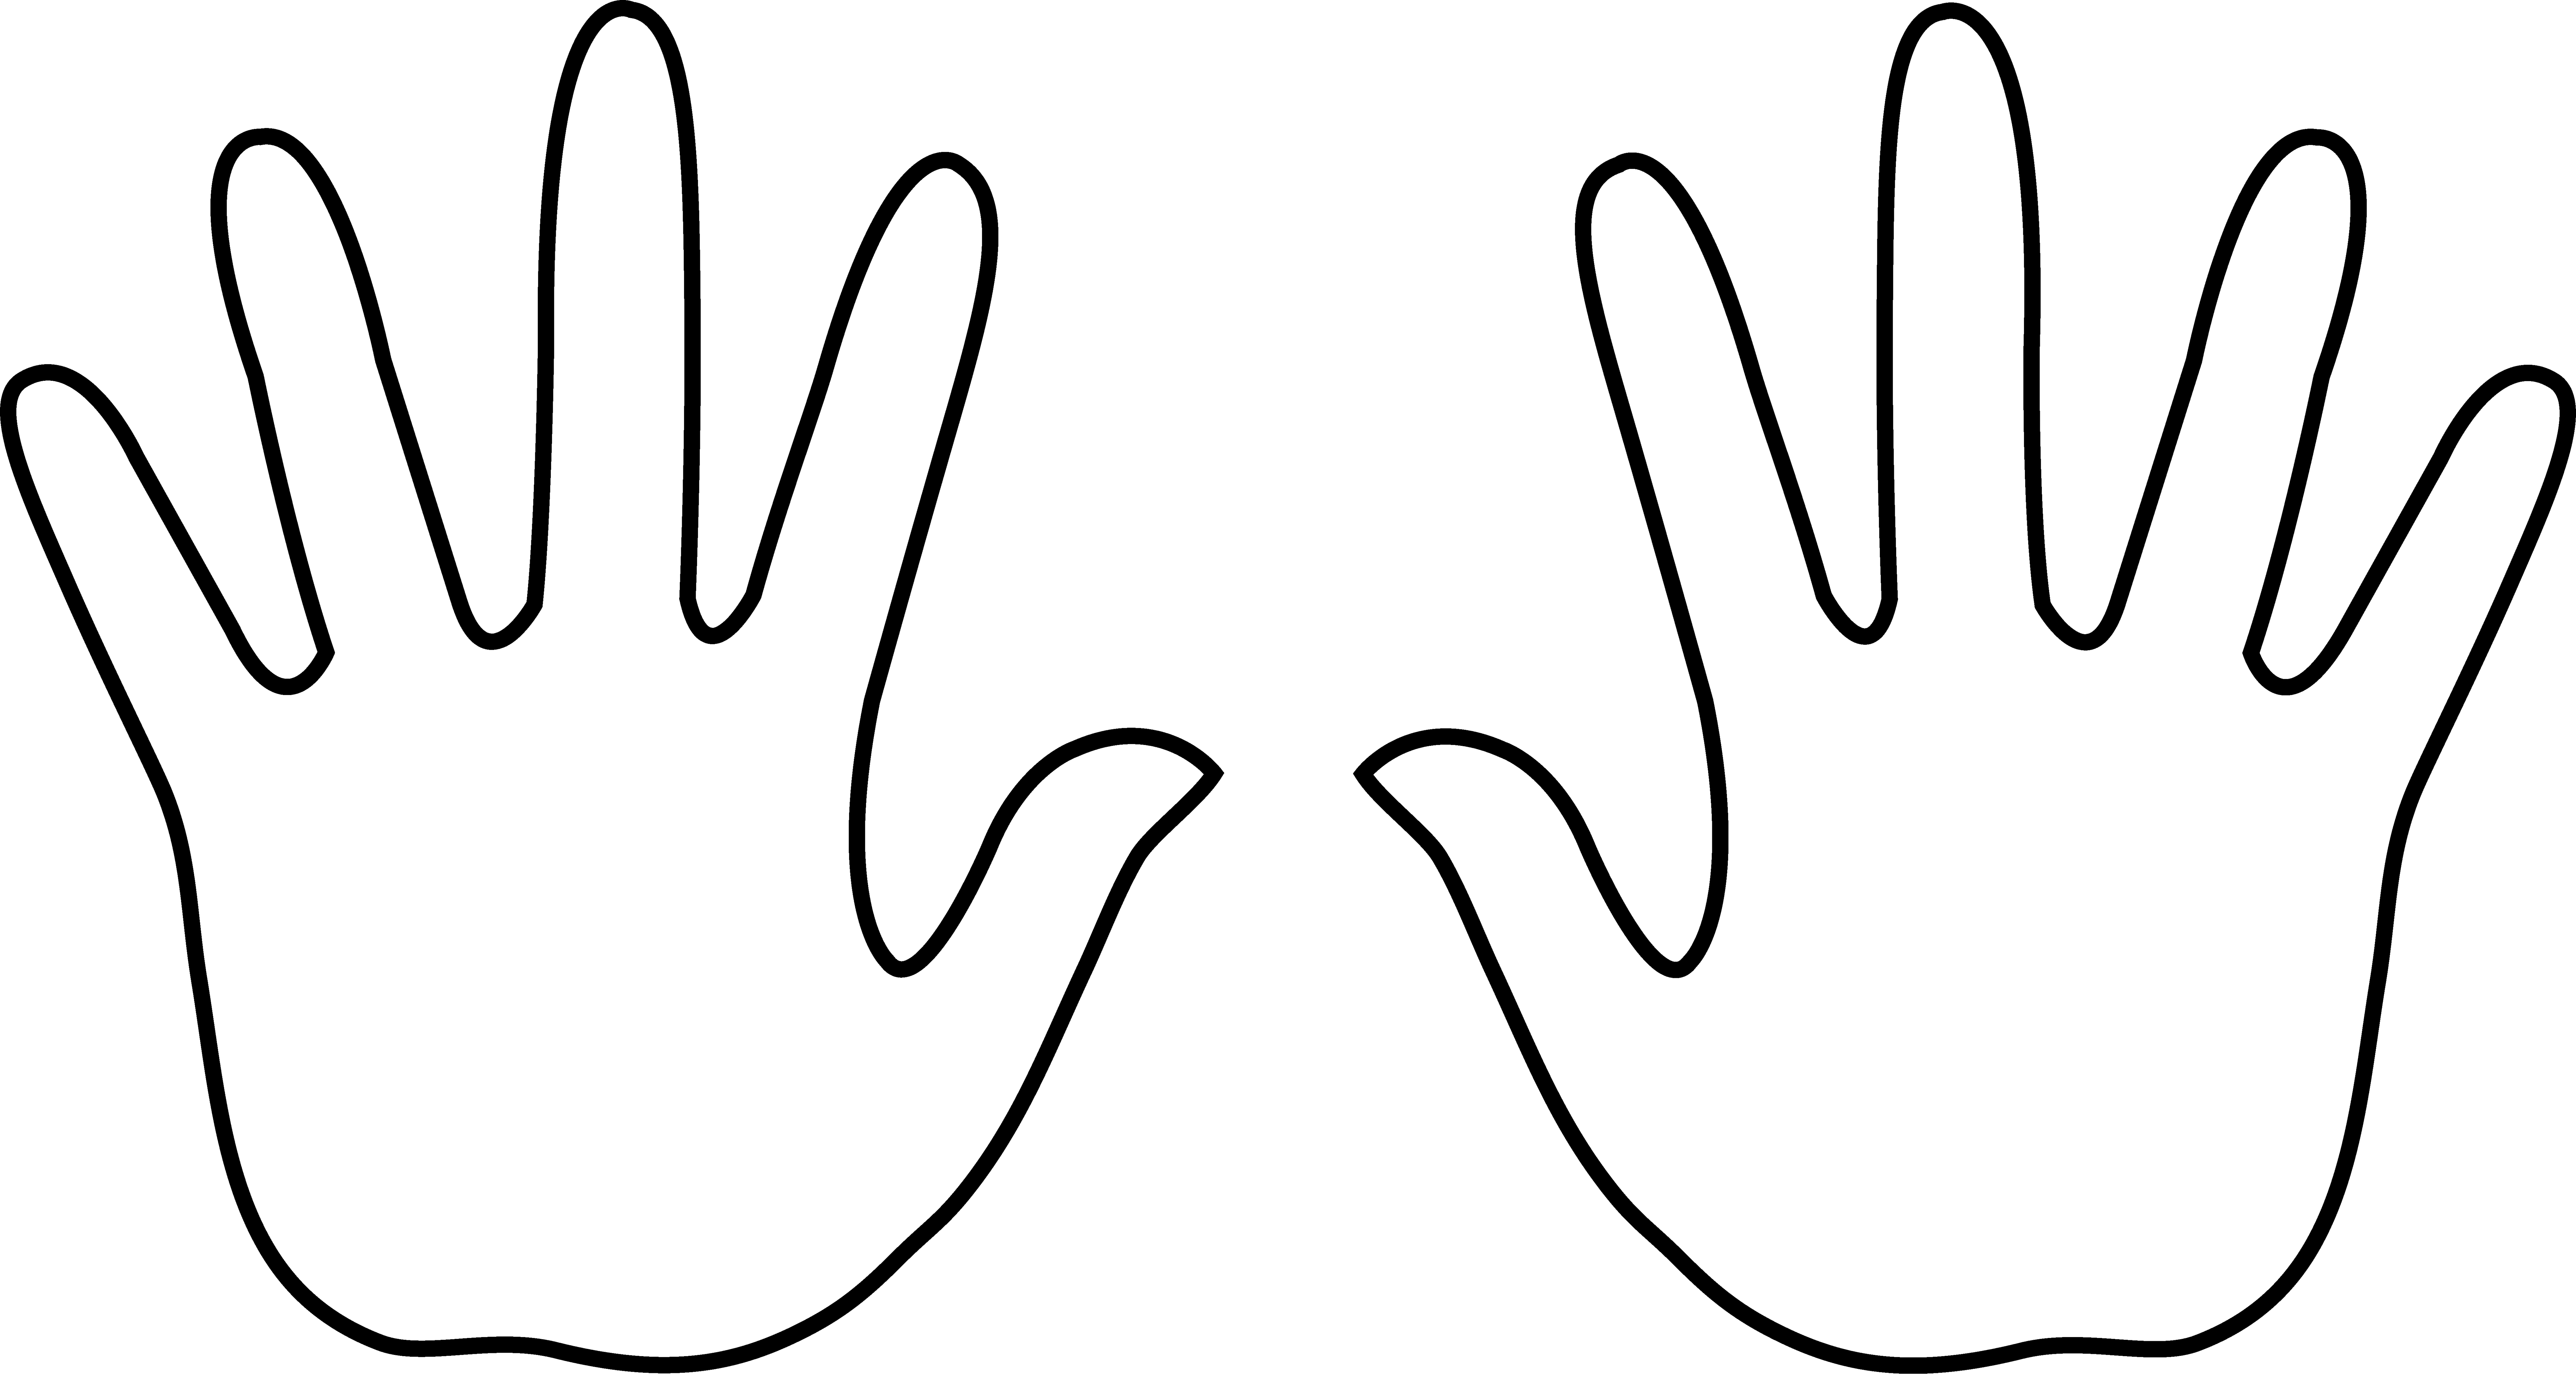 Handprint clipart black and white. Left right hand png